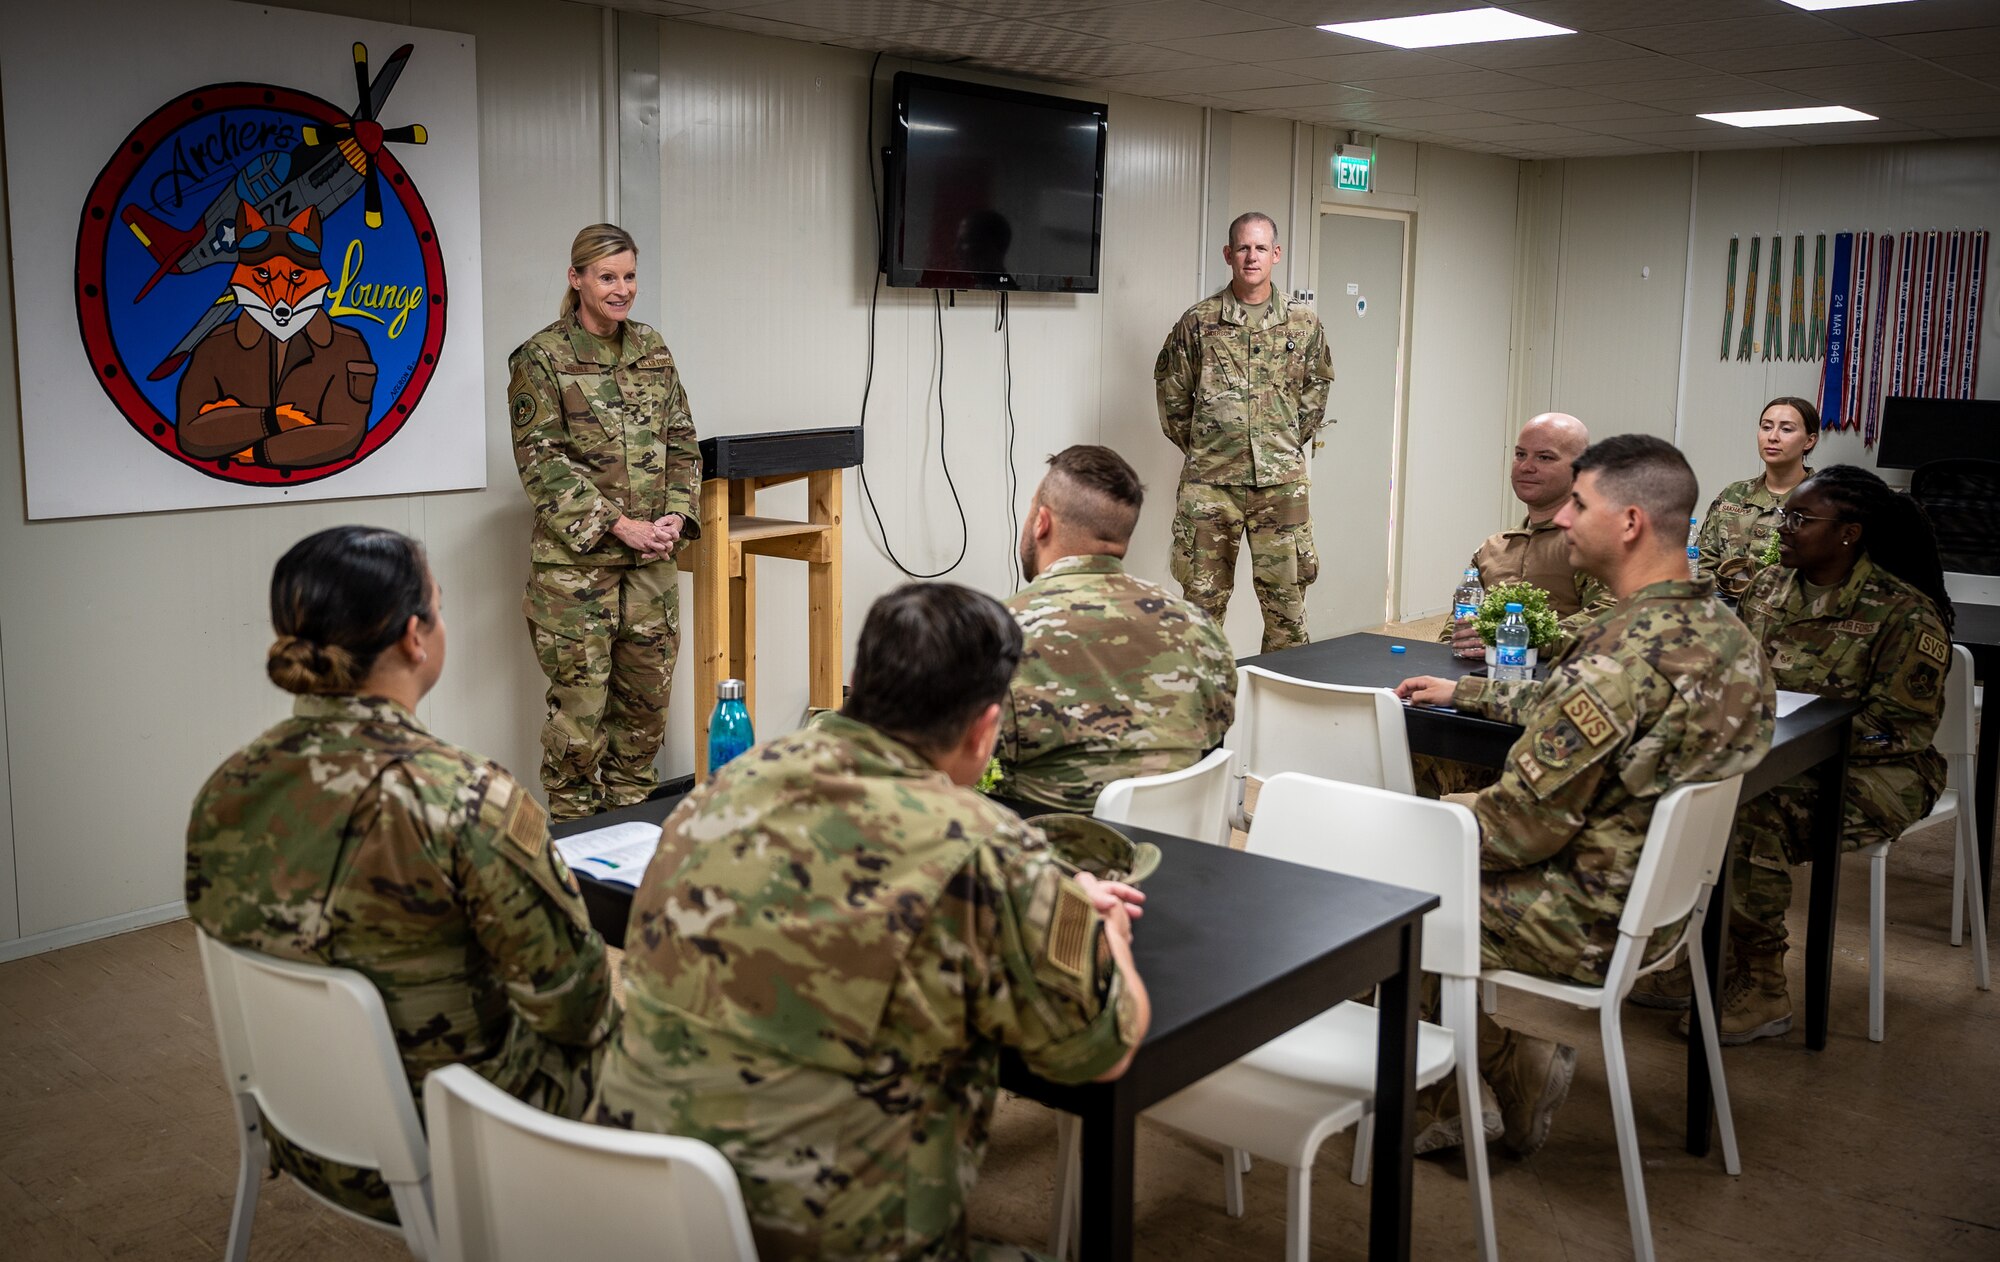 Colonel Amy Boehle, left, senior Air Reserve Component advisor for Ninth Air Force (Air Forces Central), and Lt. Col. W. Sterling Anderson II, deputy ARC advisor, talk with Guard and Reserve Red Tails from the 332d Force Support Squadron during a visit to the 332d Air Expeditionary Wing May 20, 2022, at an undisclosed location in Southwest Asia. (U.S. Air Force photo by Master Sgt. Christopher Parr)